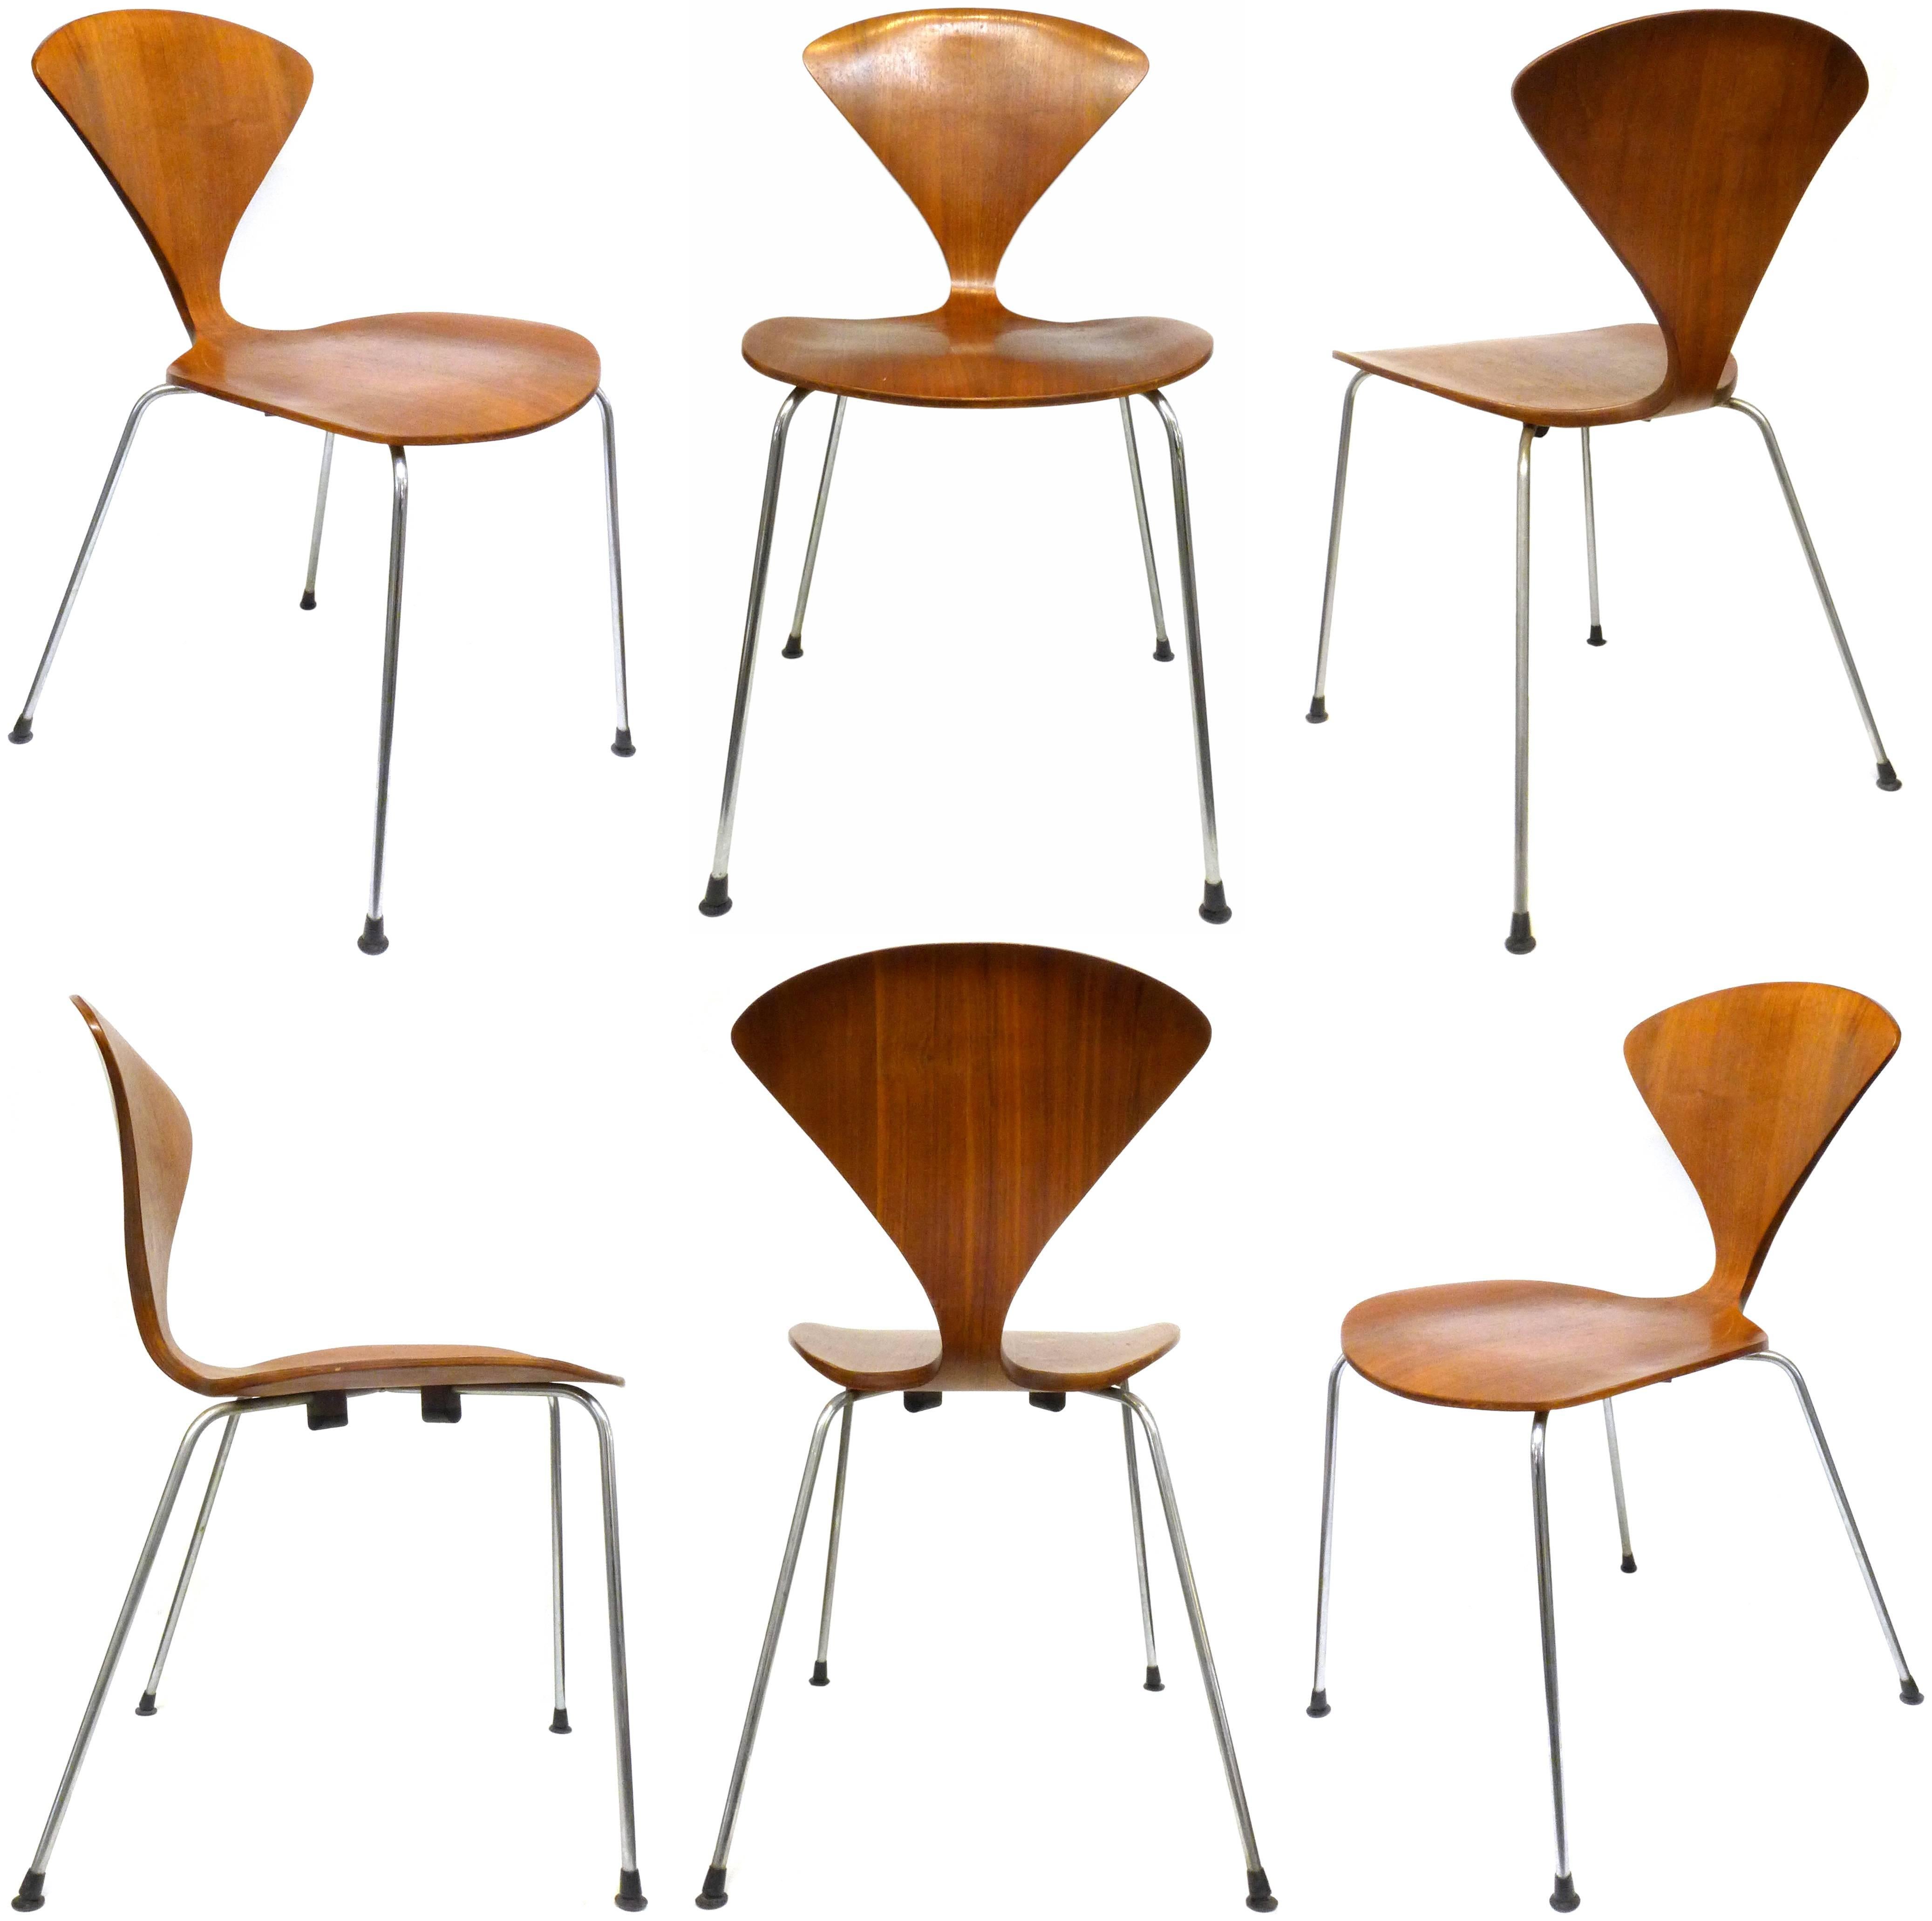 Set of Six Vintage "Cherner Chairs" by Norman Cherner for Plycraft